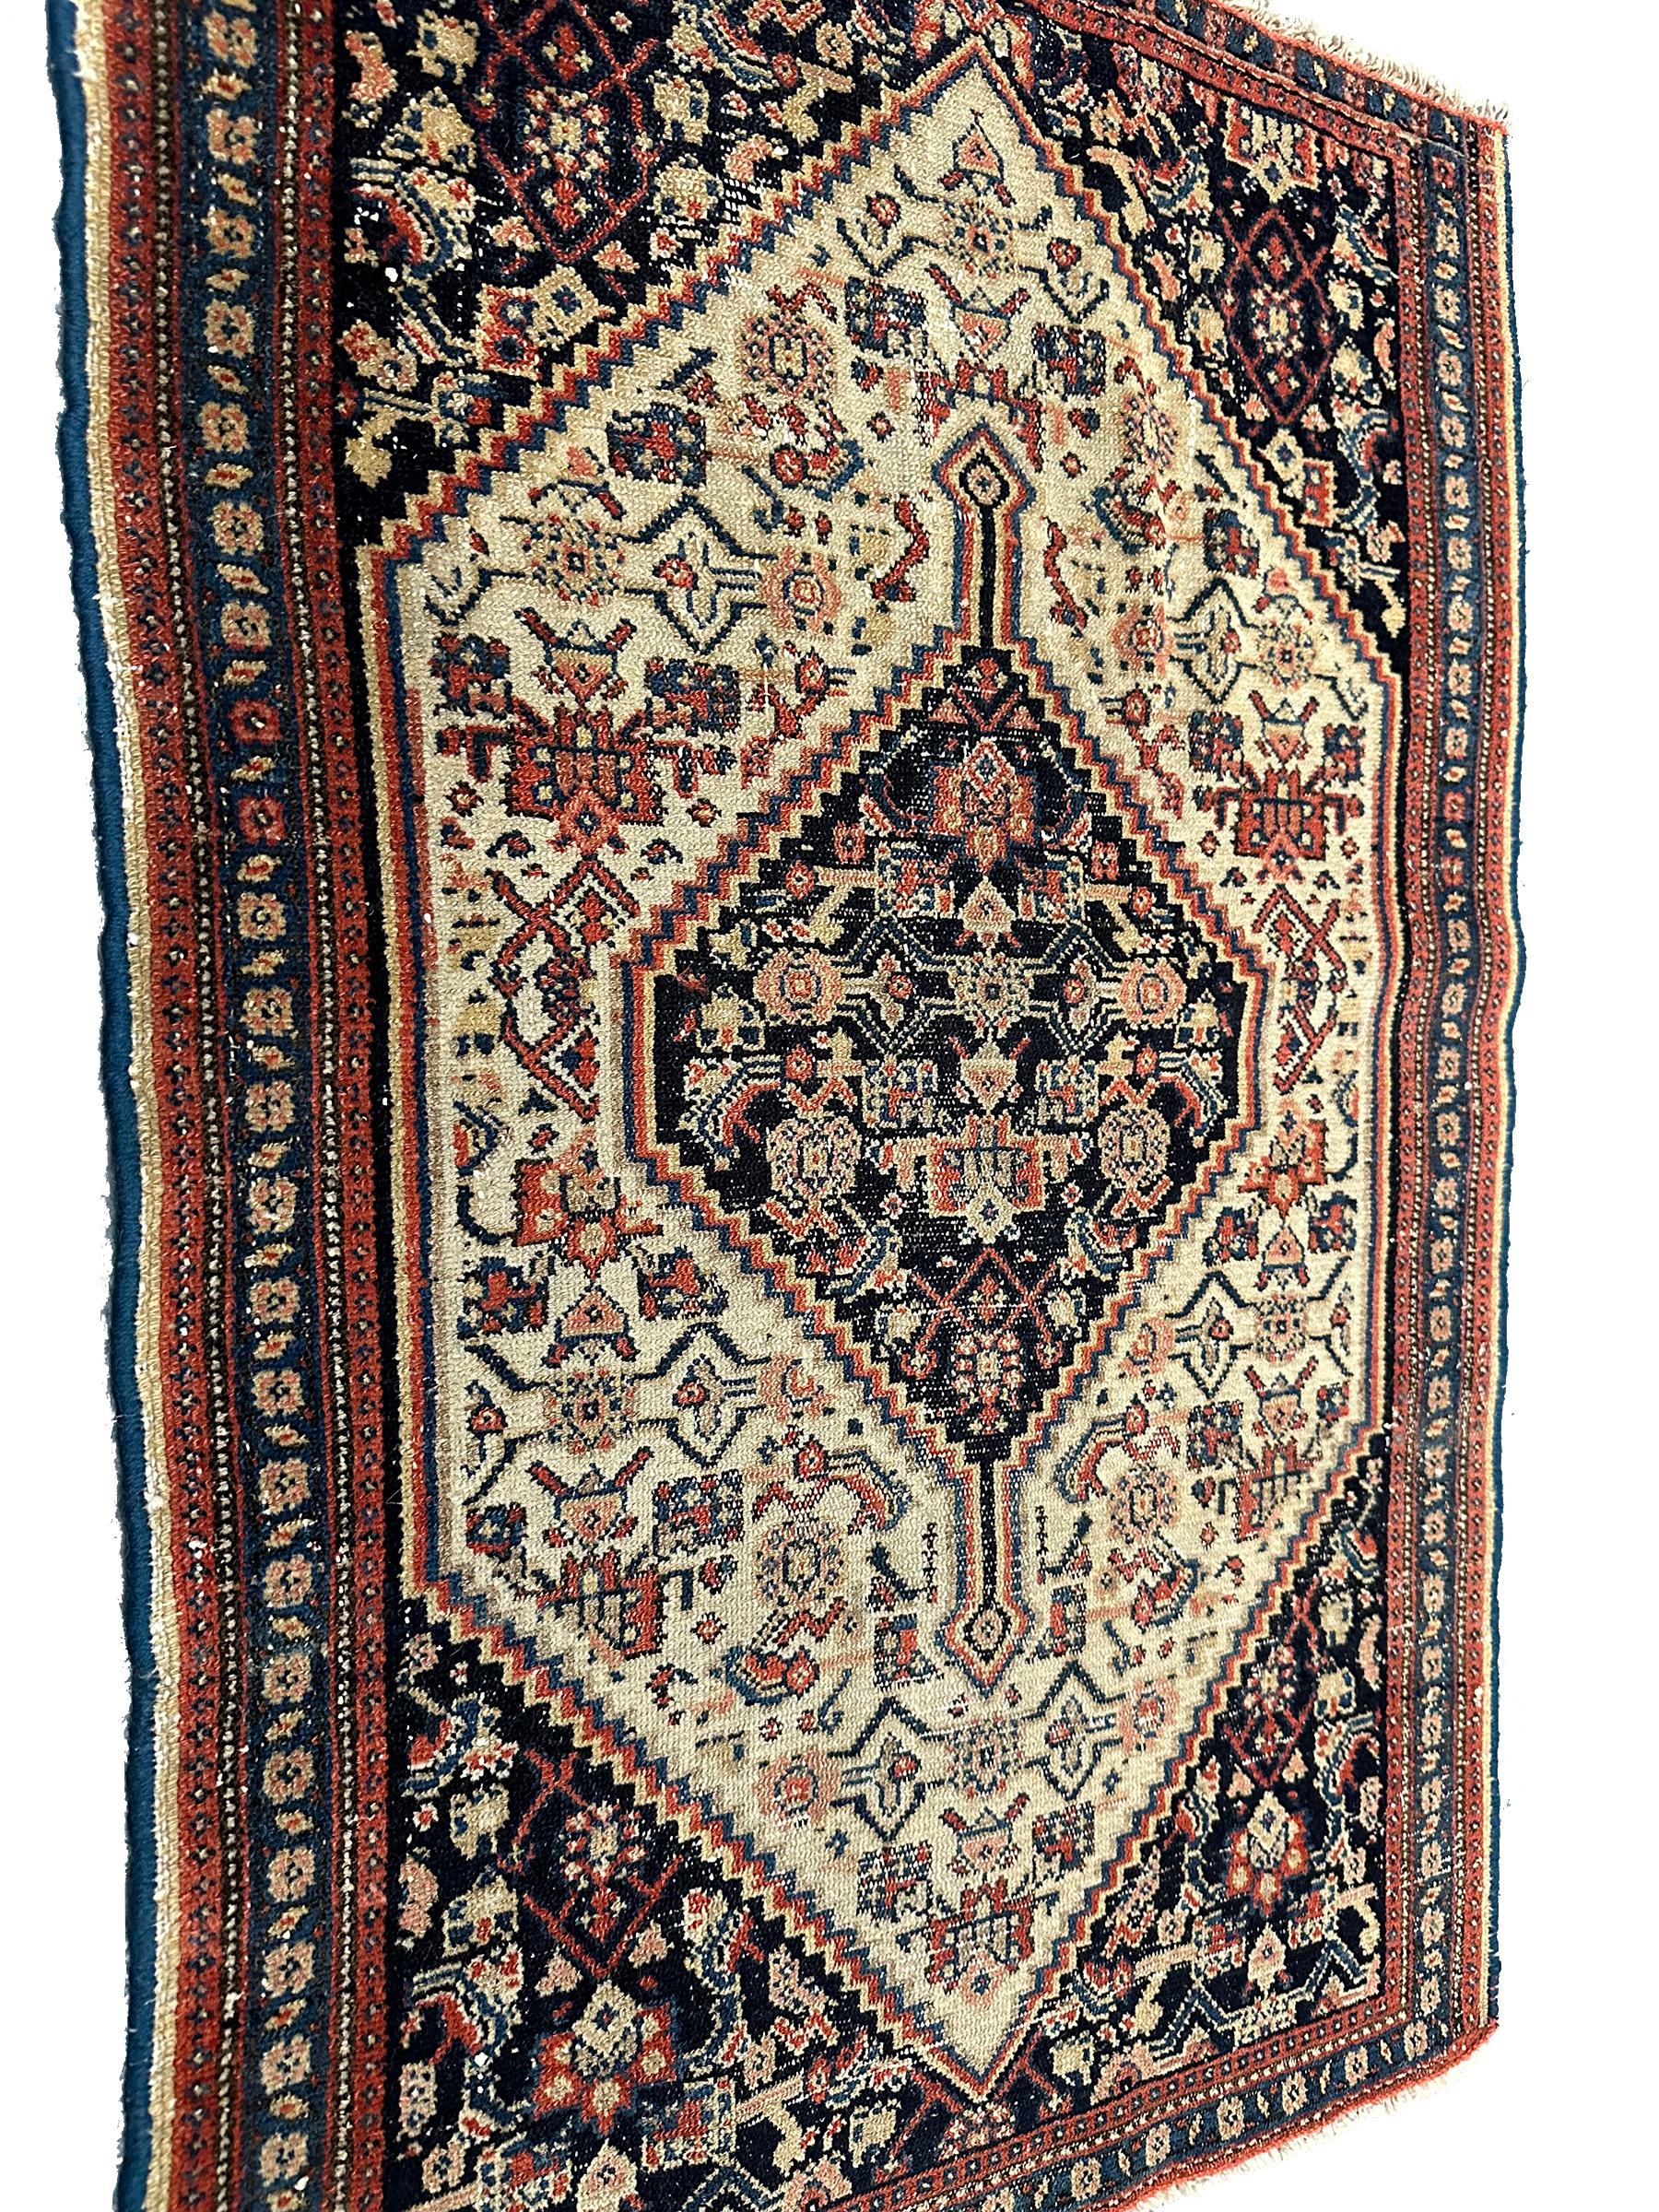 1910 Antique Senneh Rug Handmade Geometric 2x3 61cm x 92cm In Good Condition For Sale In New York, NY